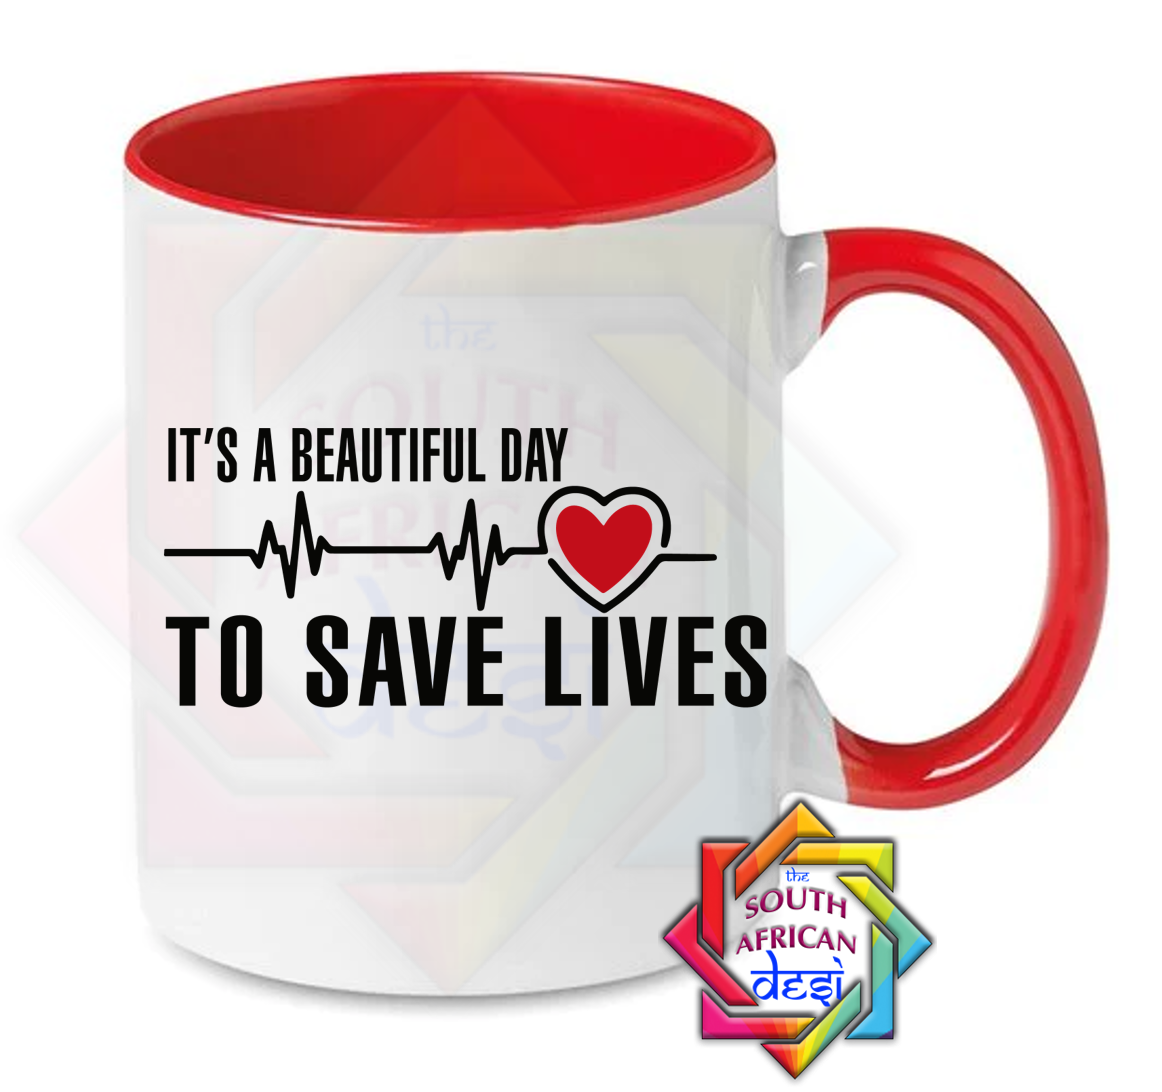 IT'S A BEAUTIFUL DAY TO SAVE LIVES  | GREYS ANATOMY INSPIRED MUG